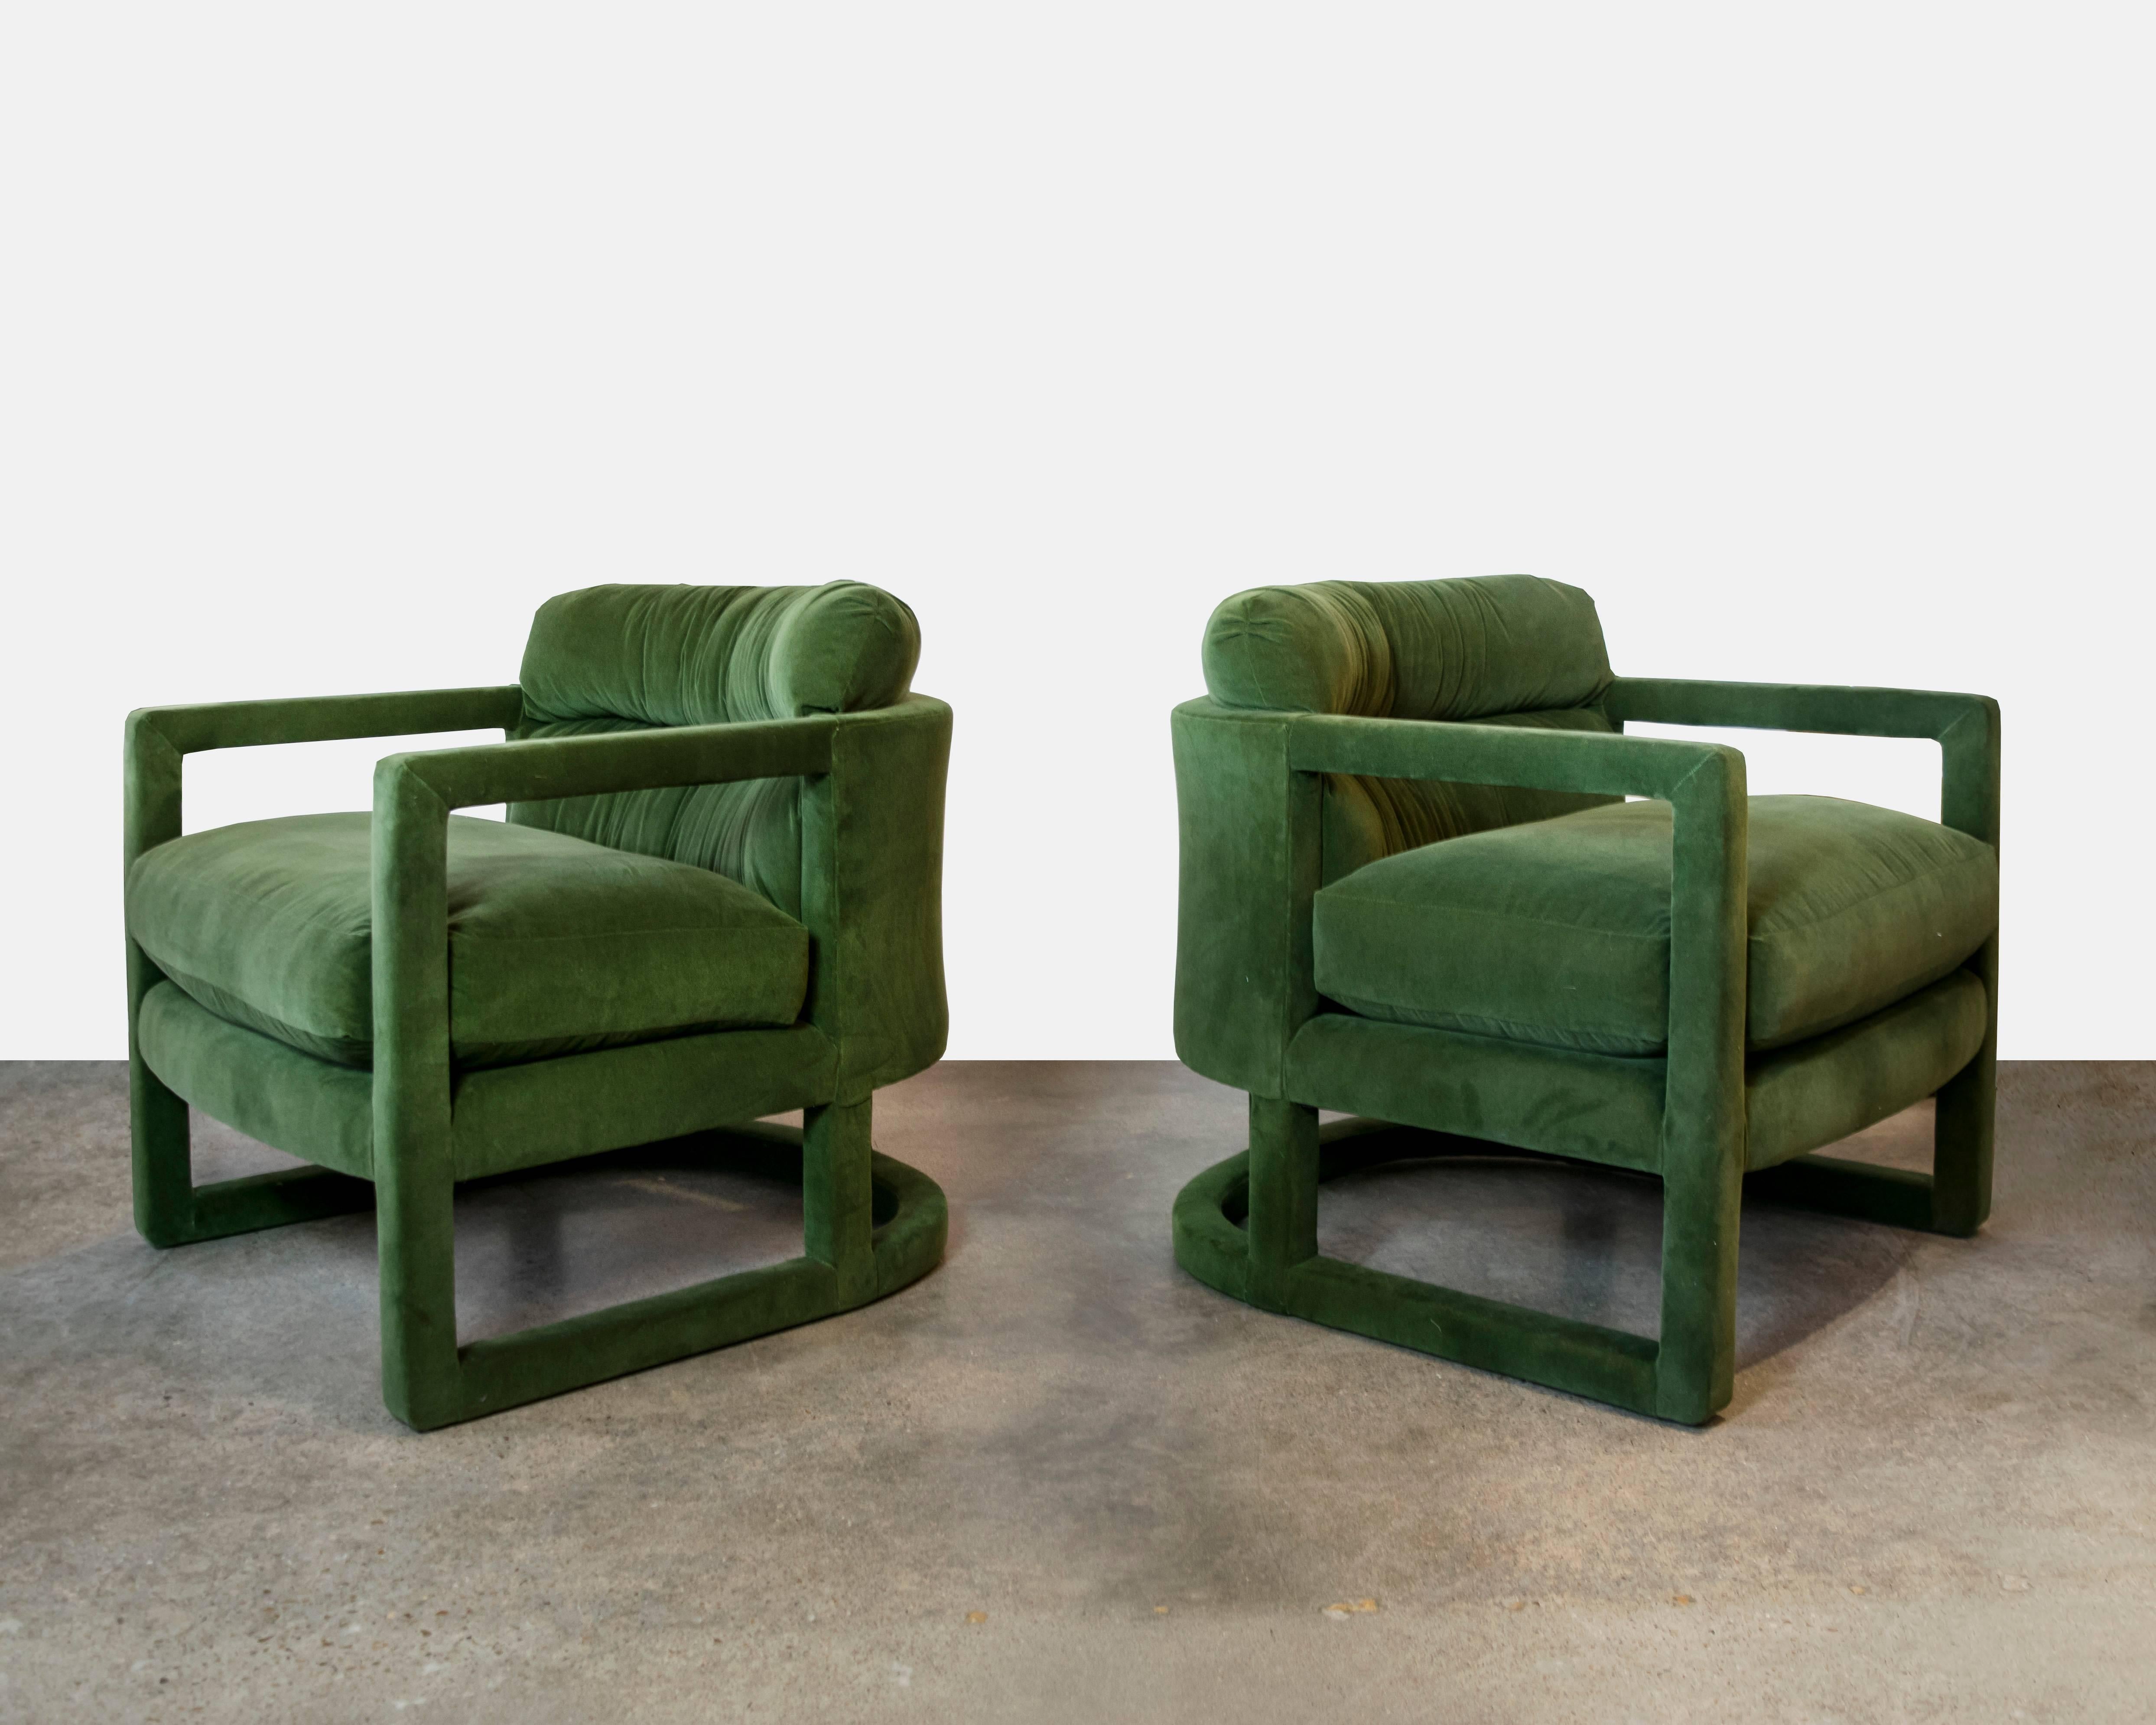 A pair of knockout sculptural chairs for Drexel either in the style of or designed by Milo Baughman with his signature 100% upholstery on the entire chair. These chairs have recently been upholstered in a loden green luscious velvet. They are so